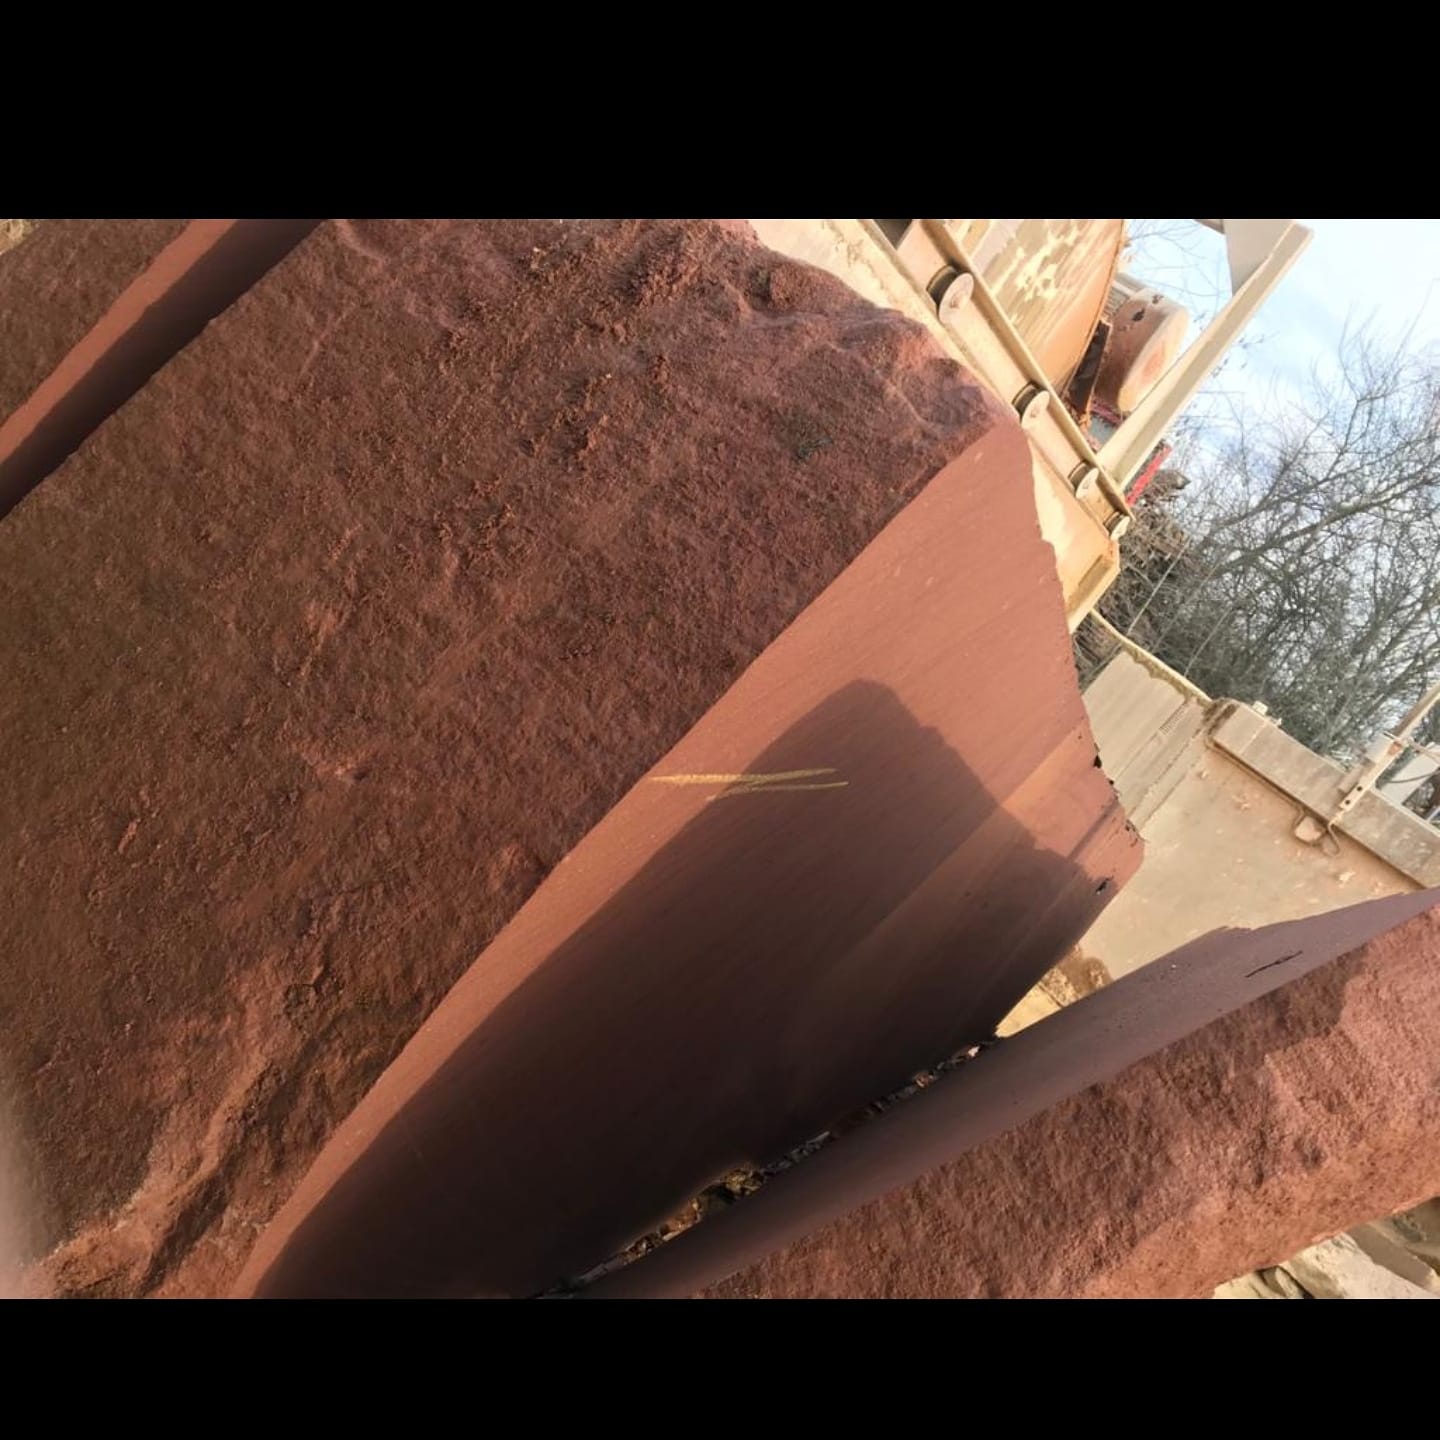 Our red sandstone ready to be cut into gate posts for an insurance job on the wirral. North Wales, North West, Wirral, Liverpool & Cheshire UK